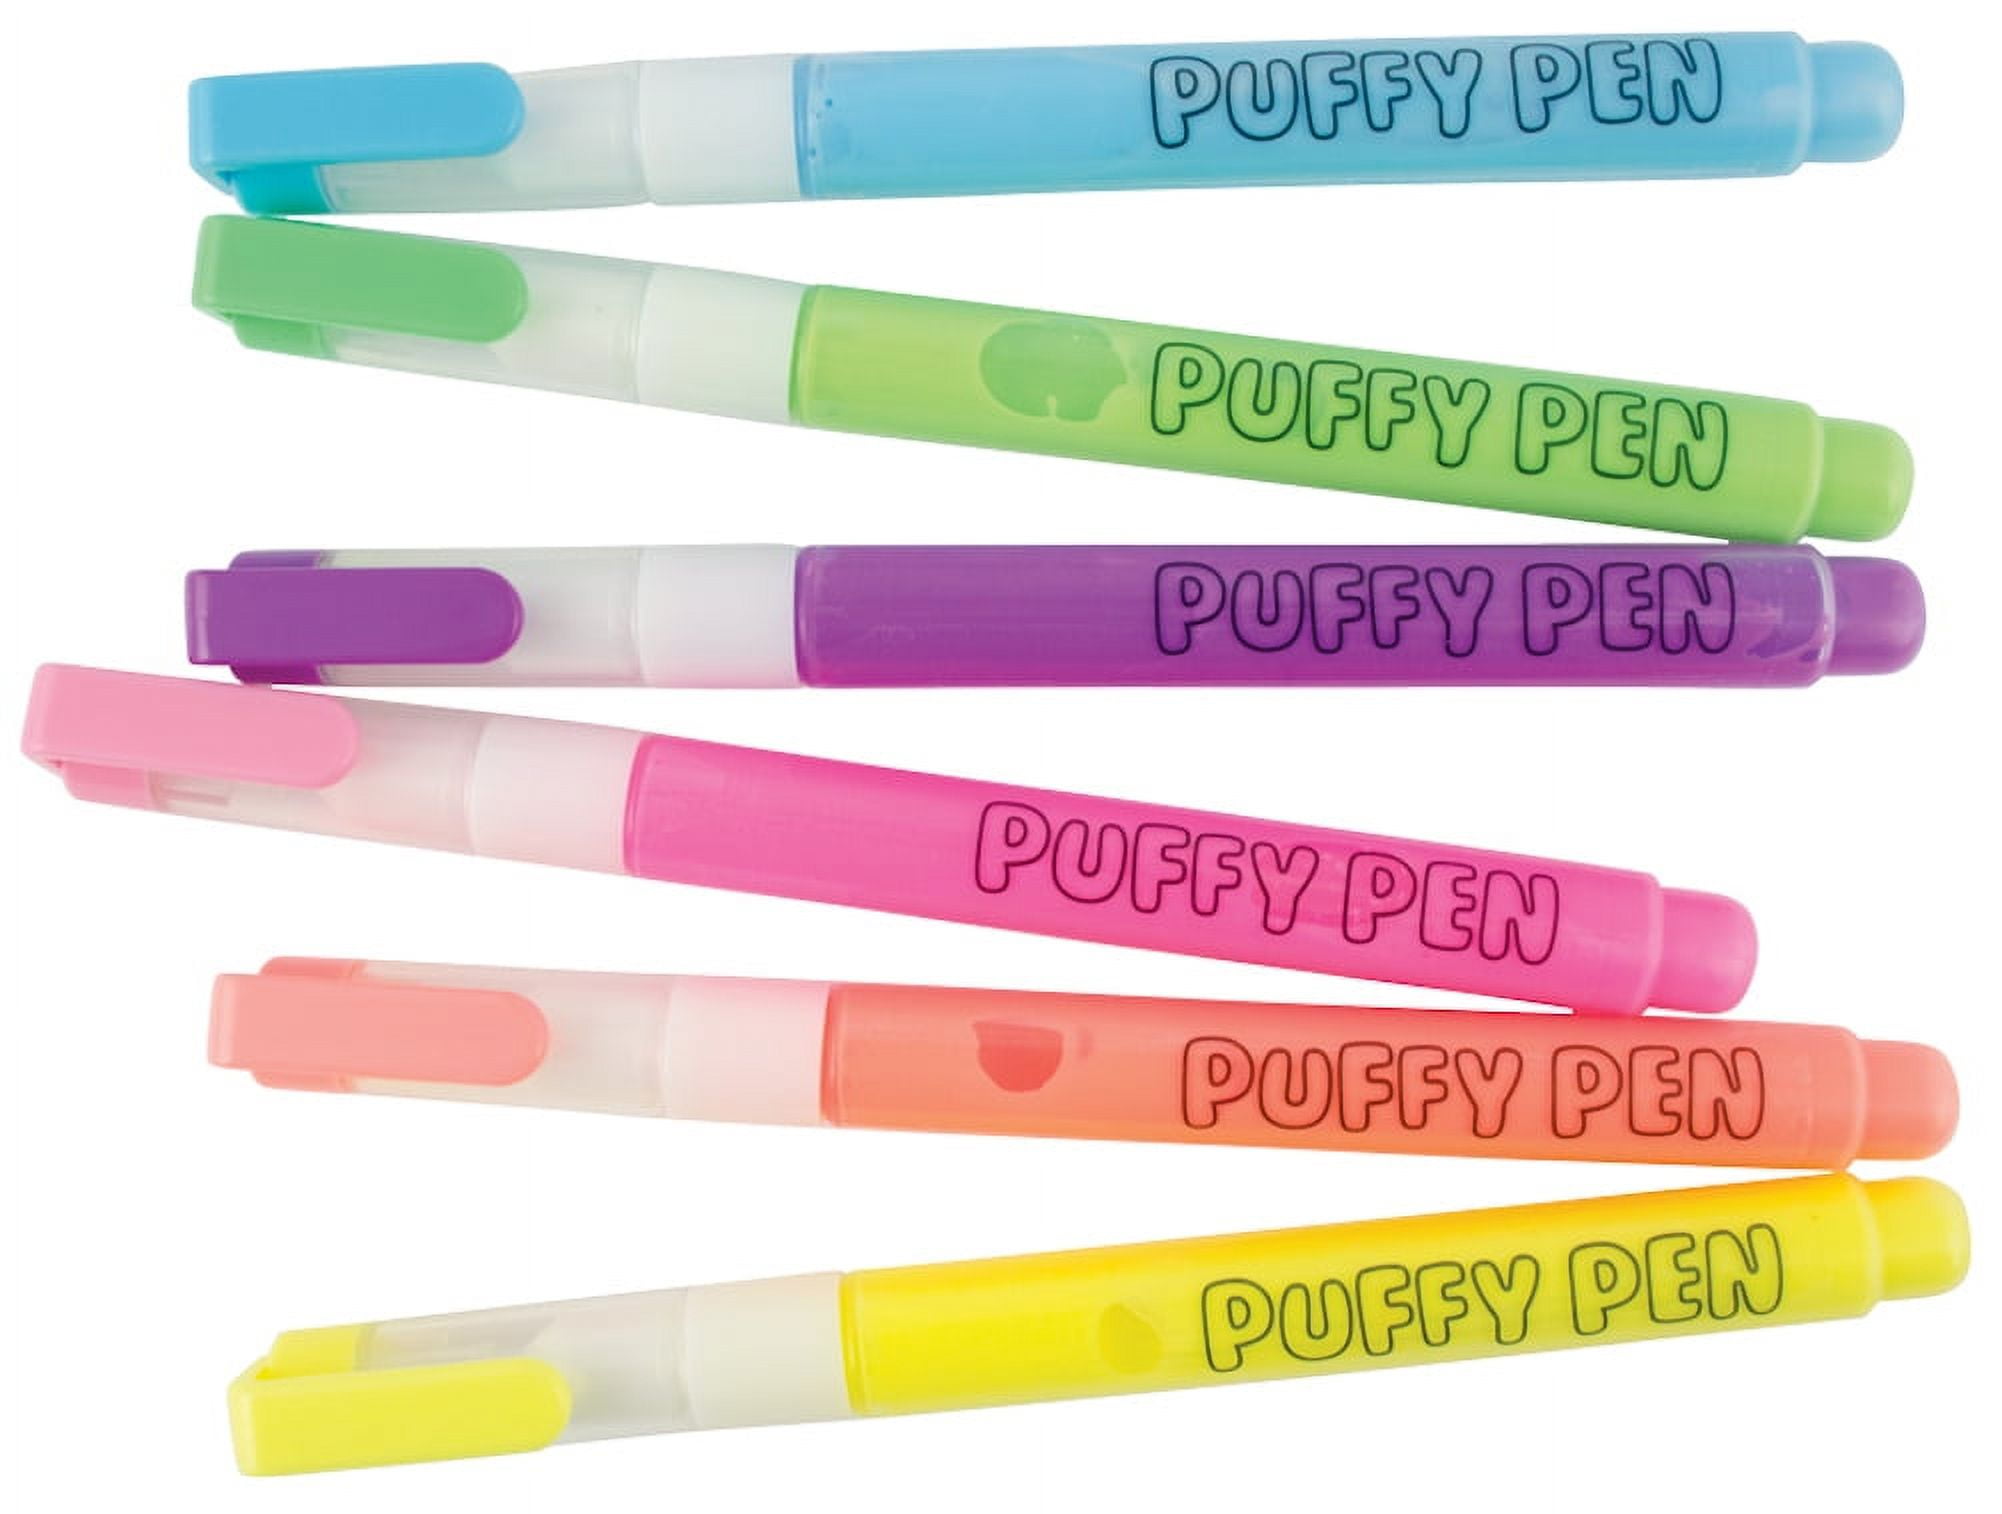 ADDY & PLUSY Dong-A Magic Puffy Popcorn Color Pen 5 Colors 3D Decorating  Cards,Drawing, Small Art